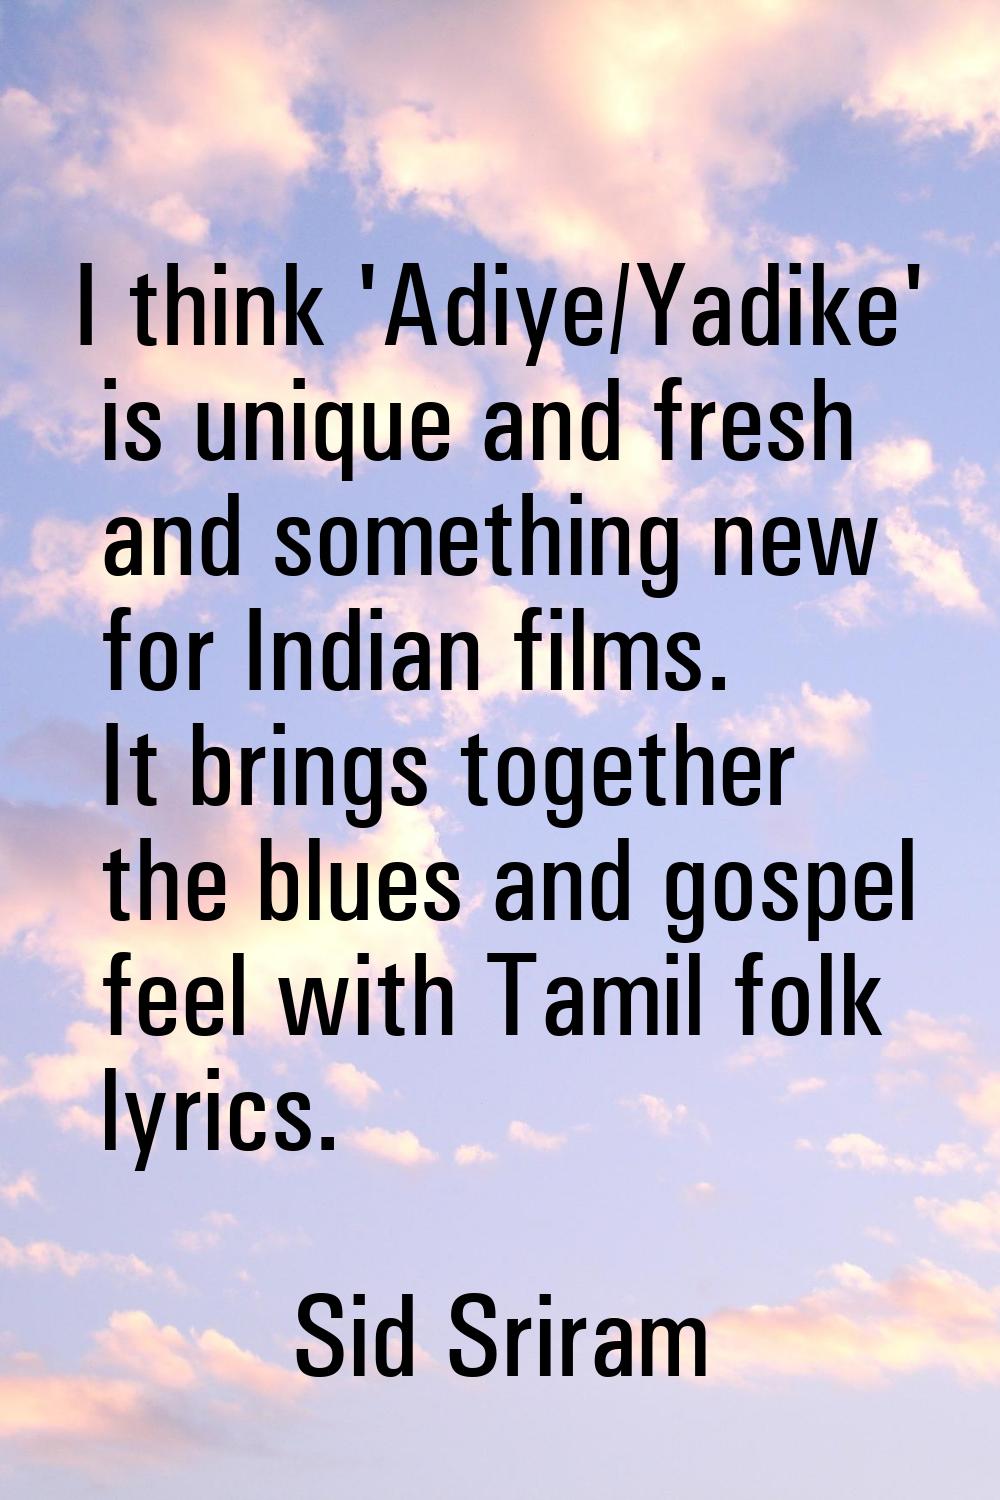 I think 'Adiye/Yadike' is unique and fresh and something new for Indian films. It brings together t